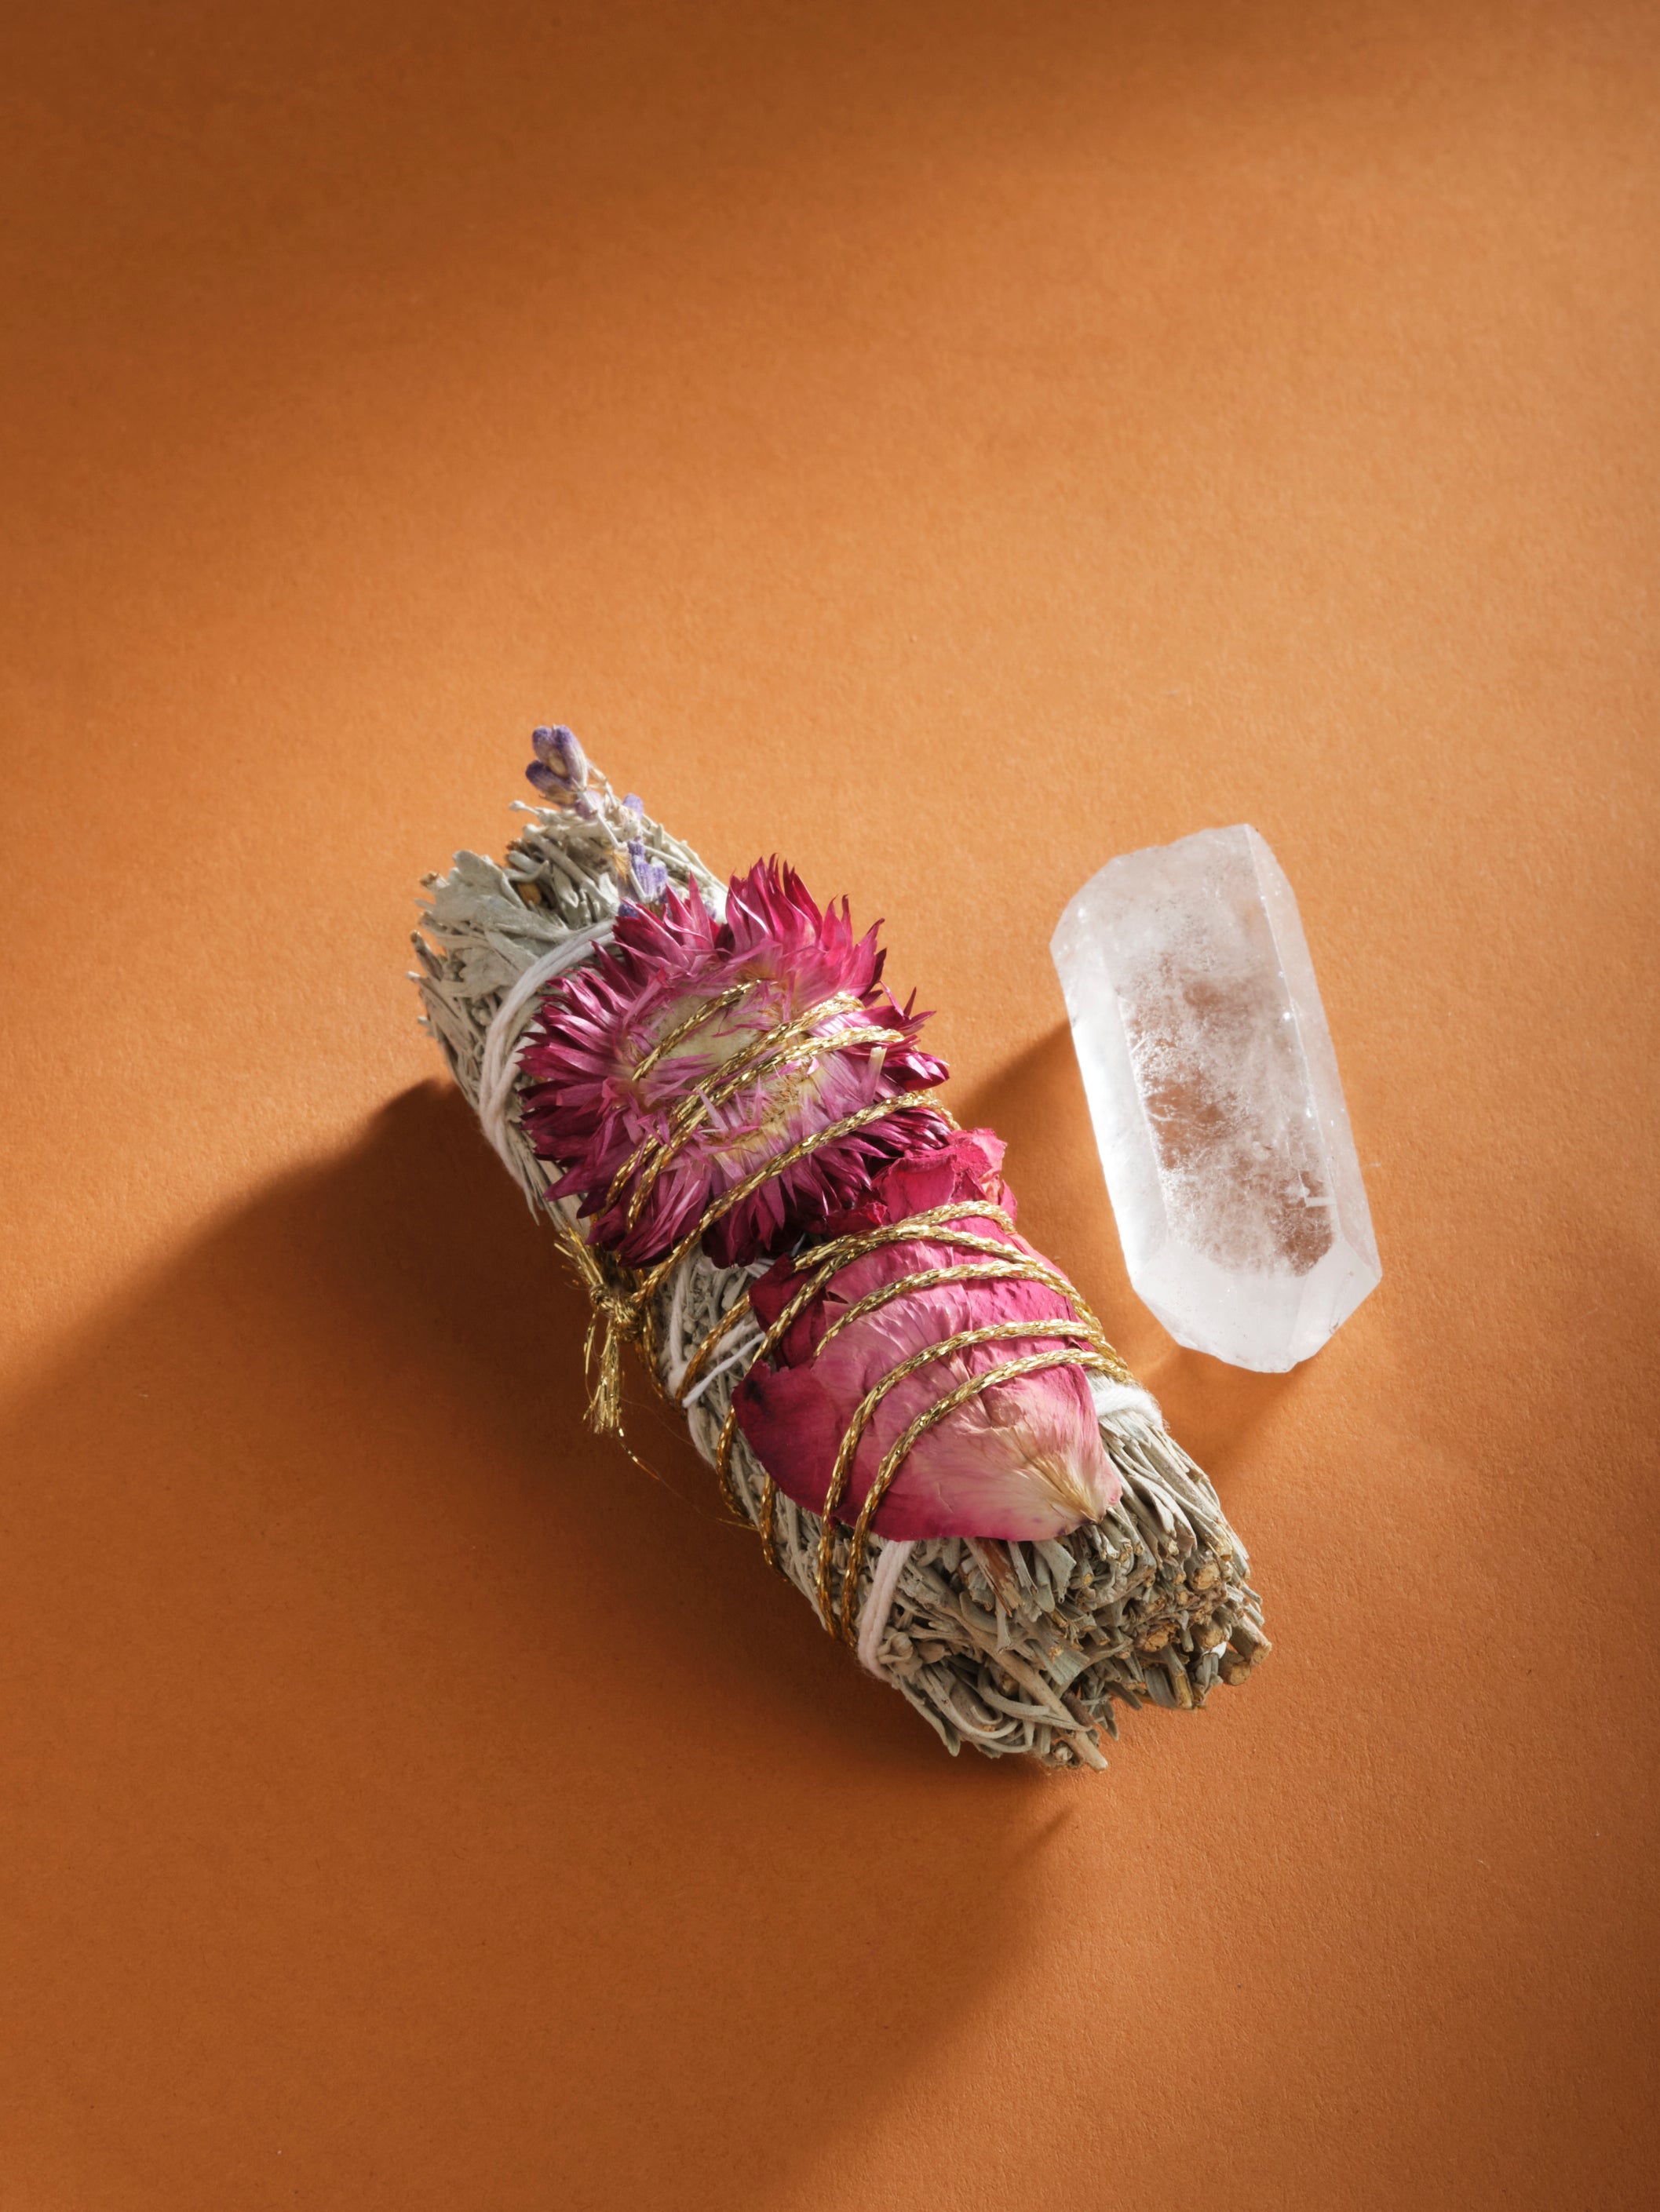 A bundle of desert blue sage and a clear quartz crystal are featured in the product image for "Release & Revitalize" from My Healing Kit.